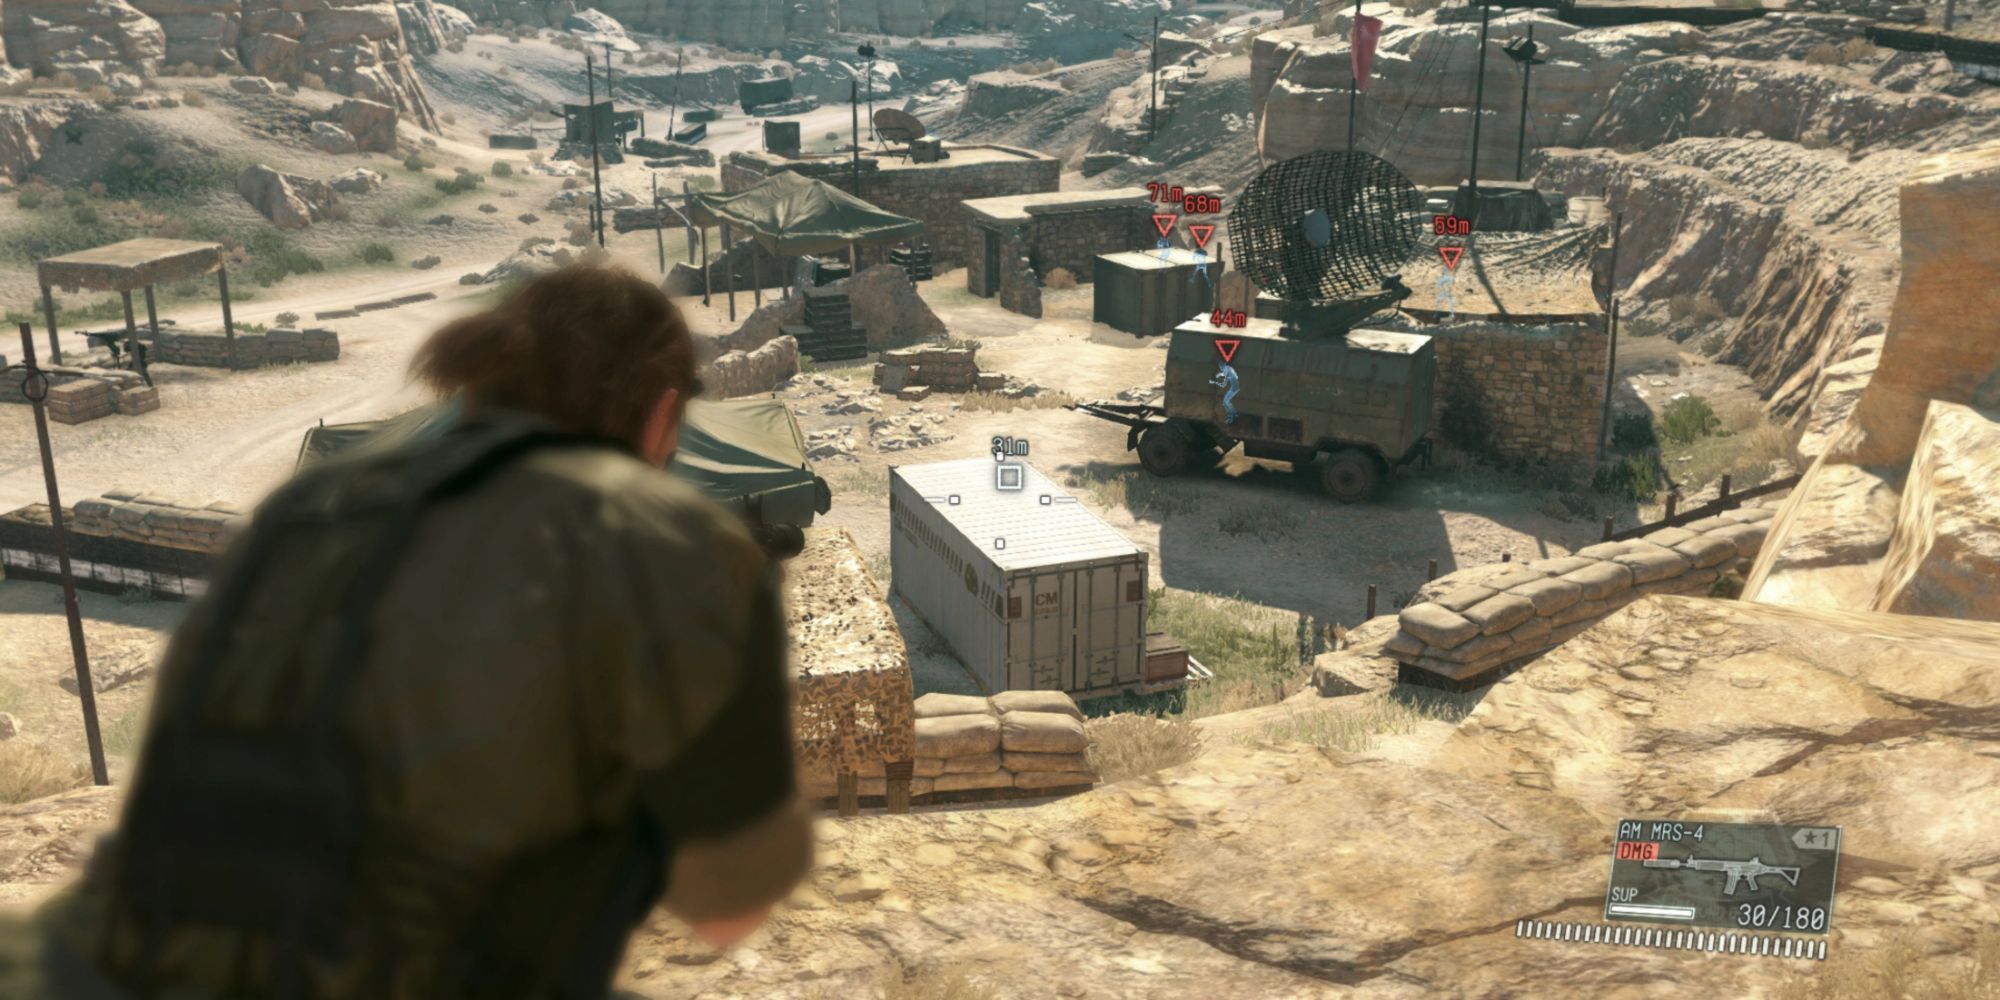 Metal Gear Solid V The Phantom Pain is stealth refined for the modern generation